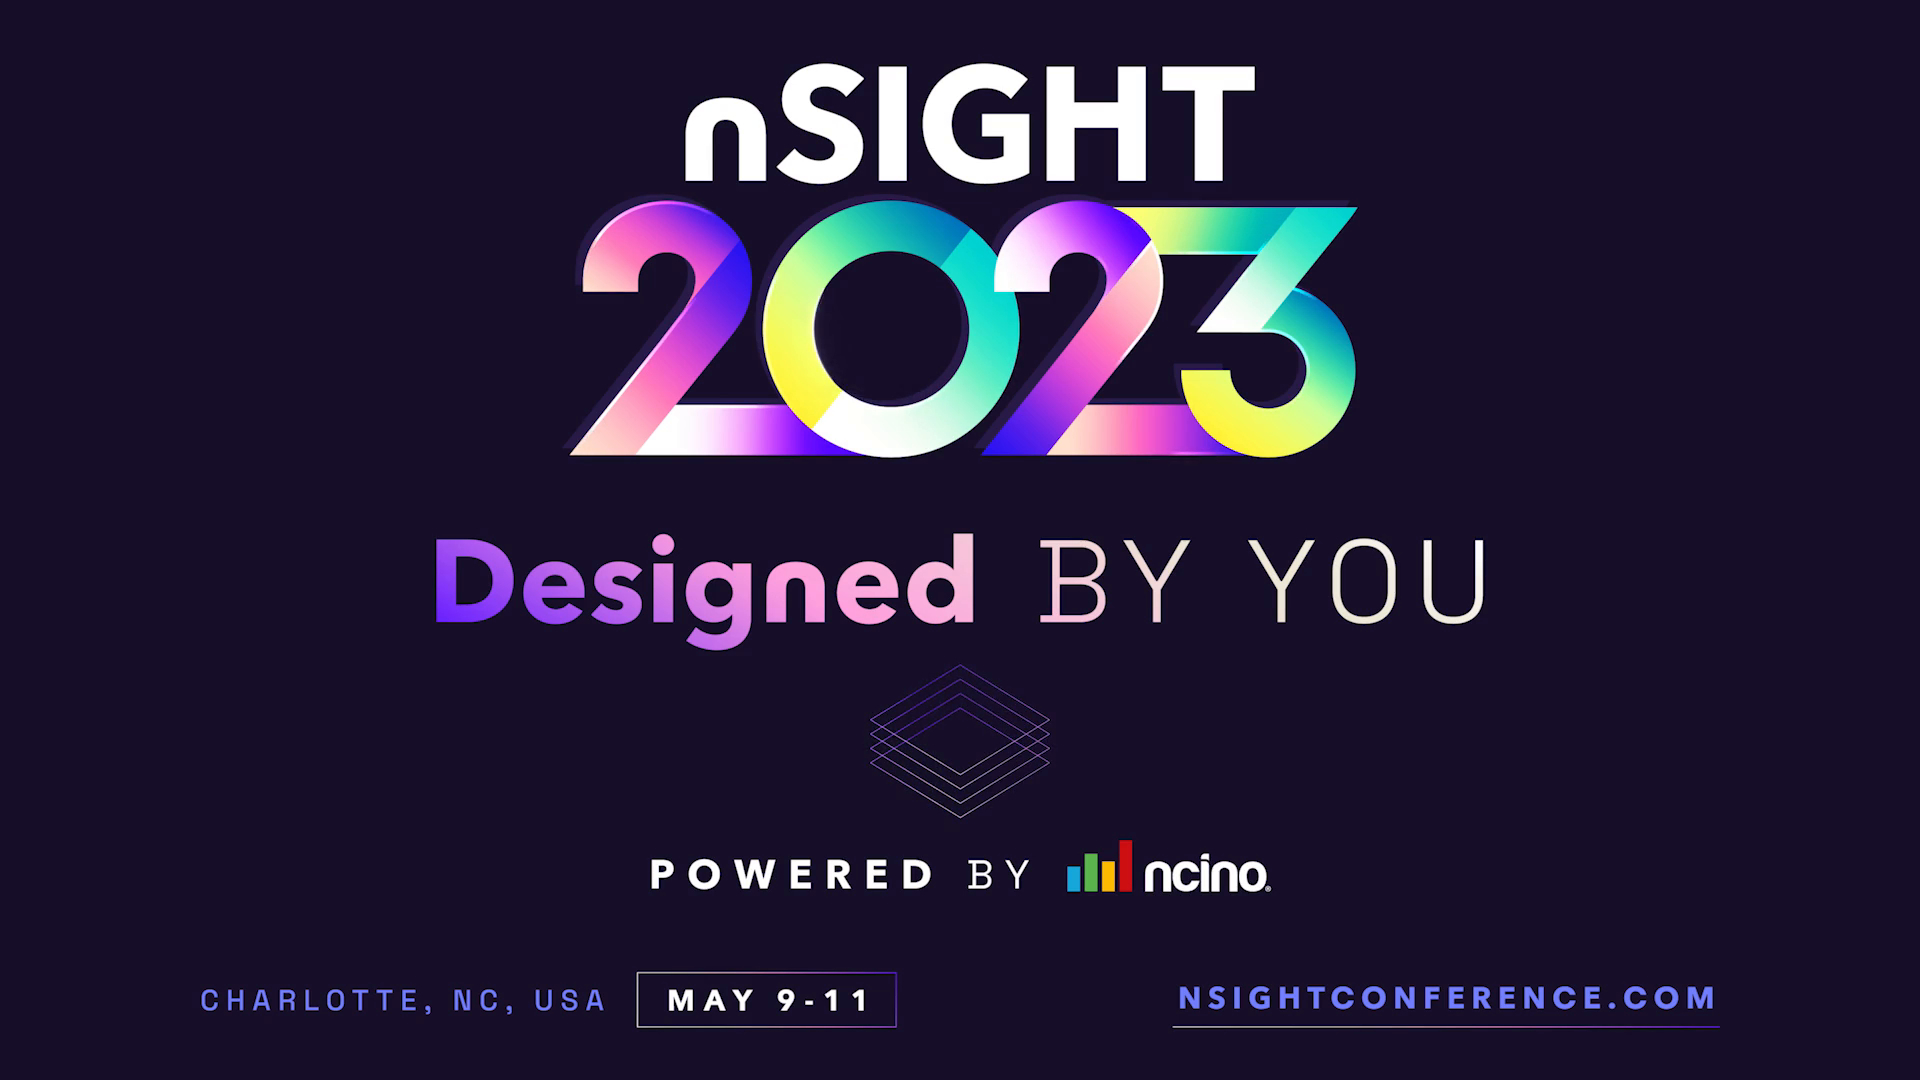 This image contains the thumbnail for the nSight 2023 promo video with text that reads nCino 2023: Designed by YOU, powered by nCino.